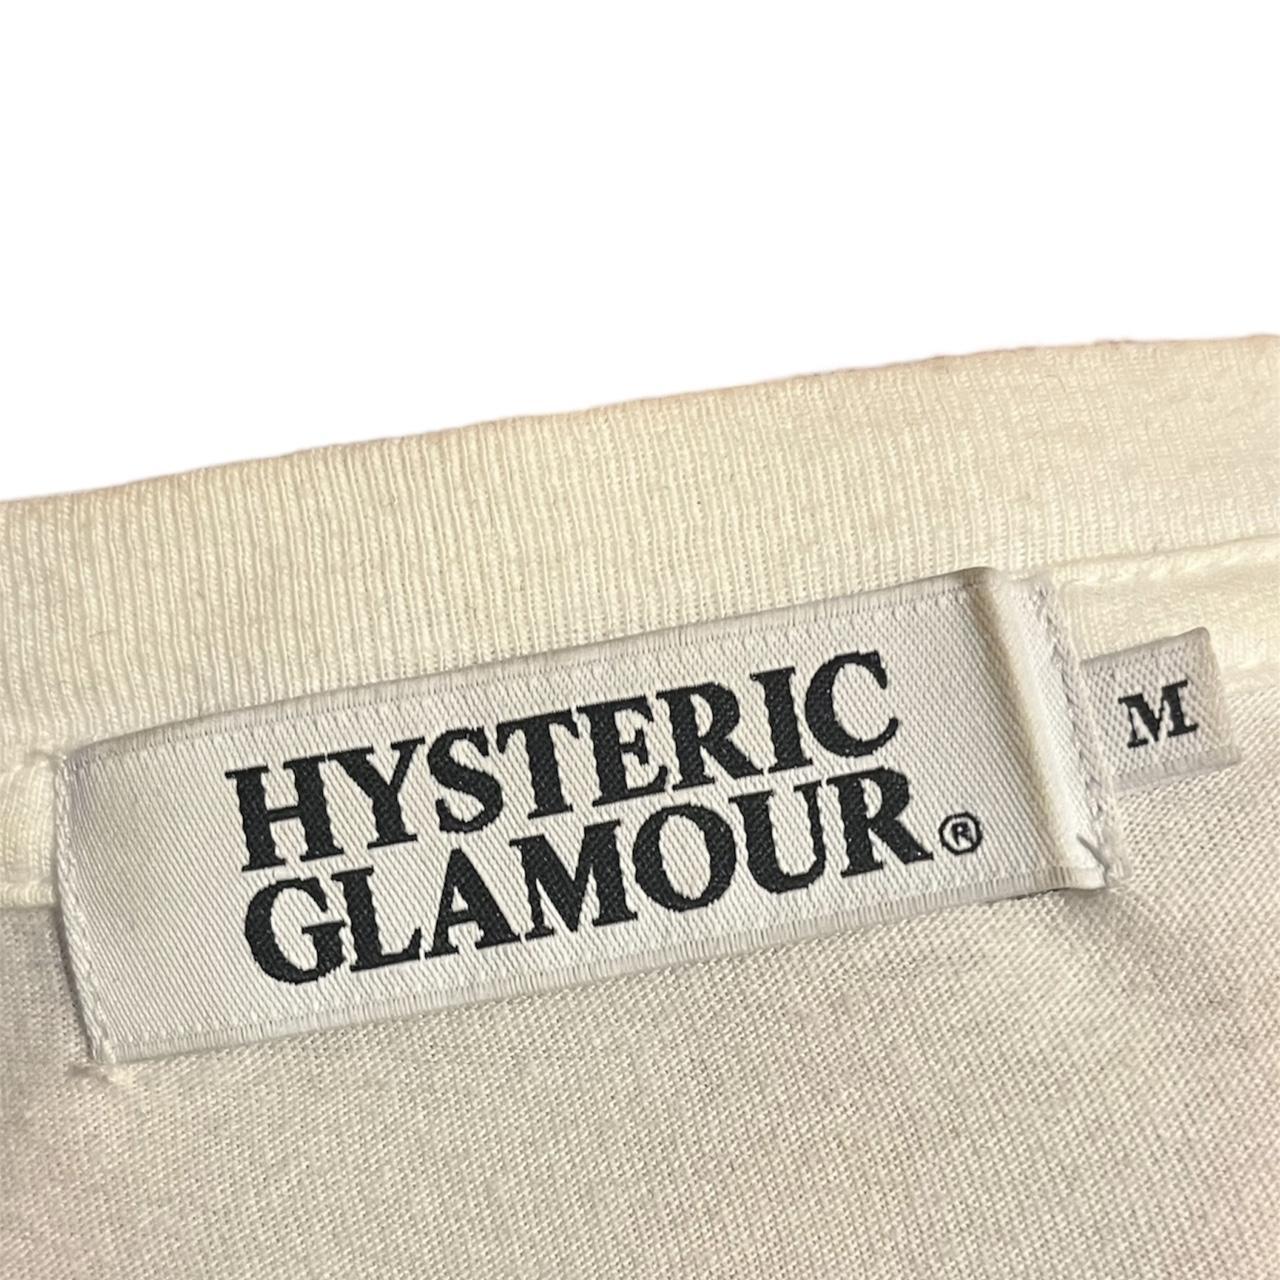 Hysteric Glamour Men's White T-shirt (3)